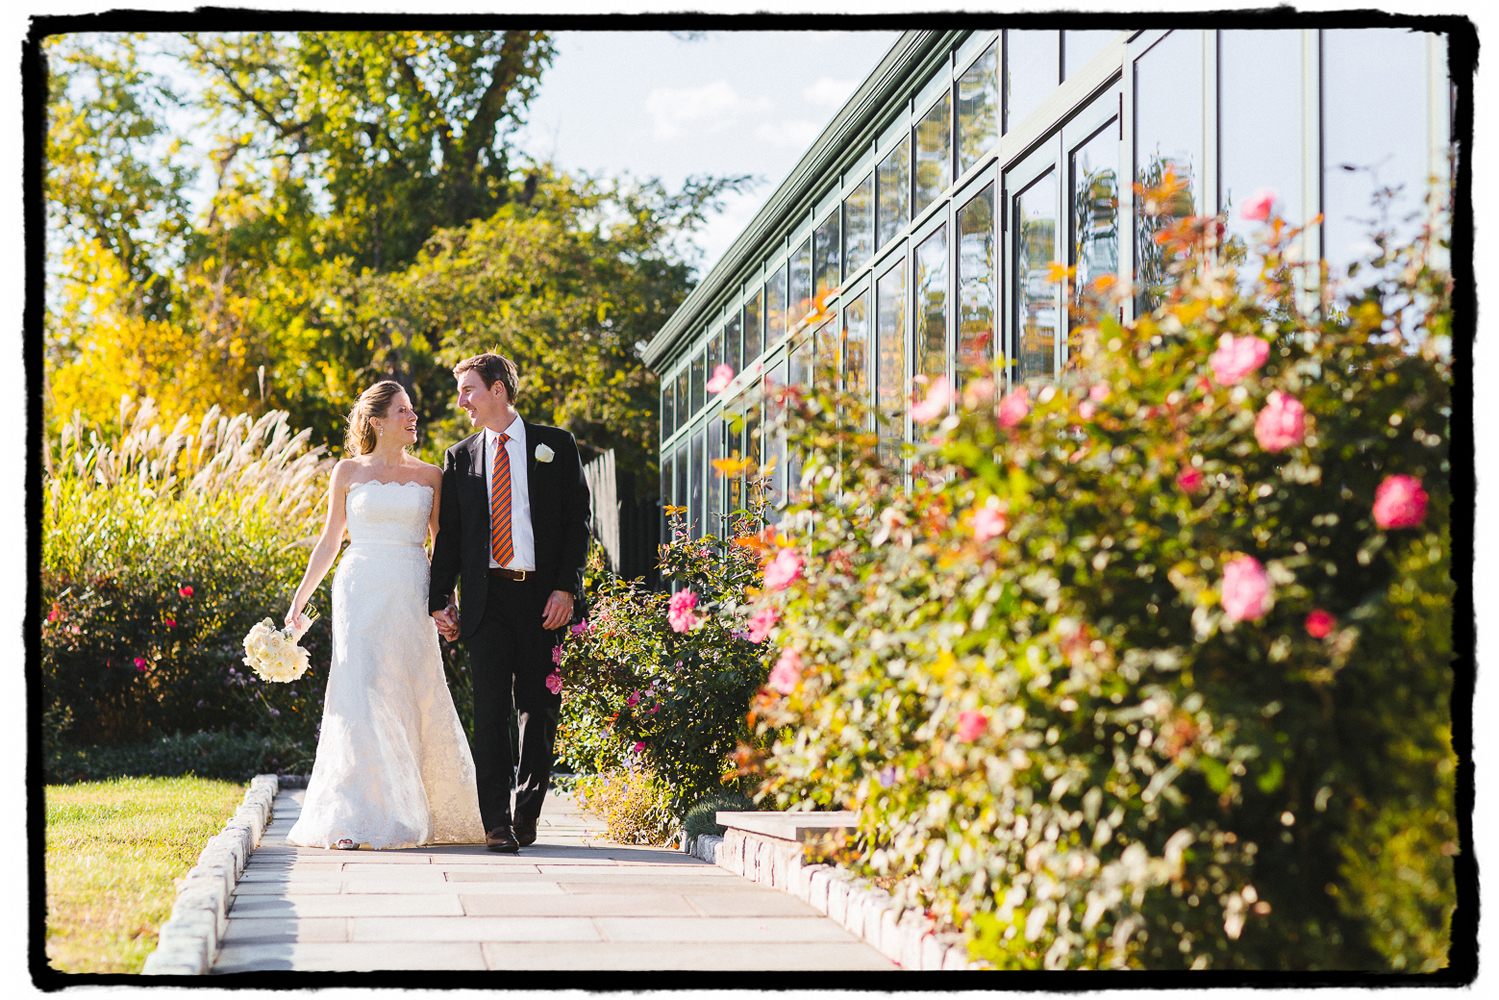 Noelle and Tim were radiant on their wedding day as they walked along this path at Highlands Country Club in the Hudson Valley.